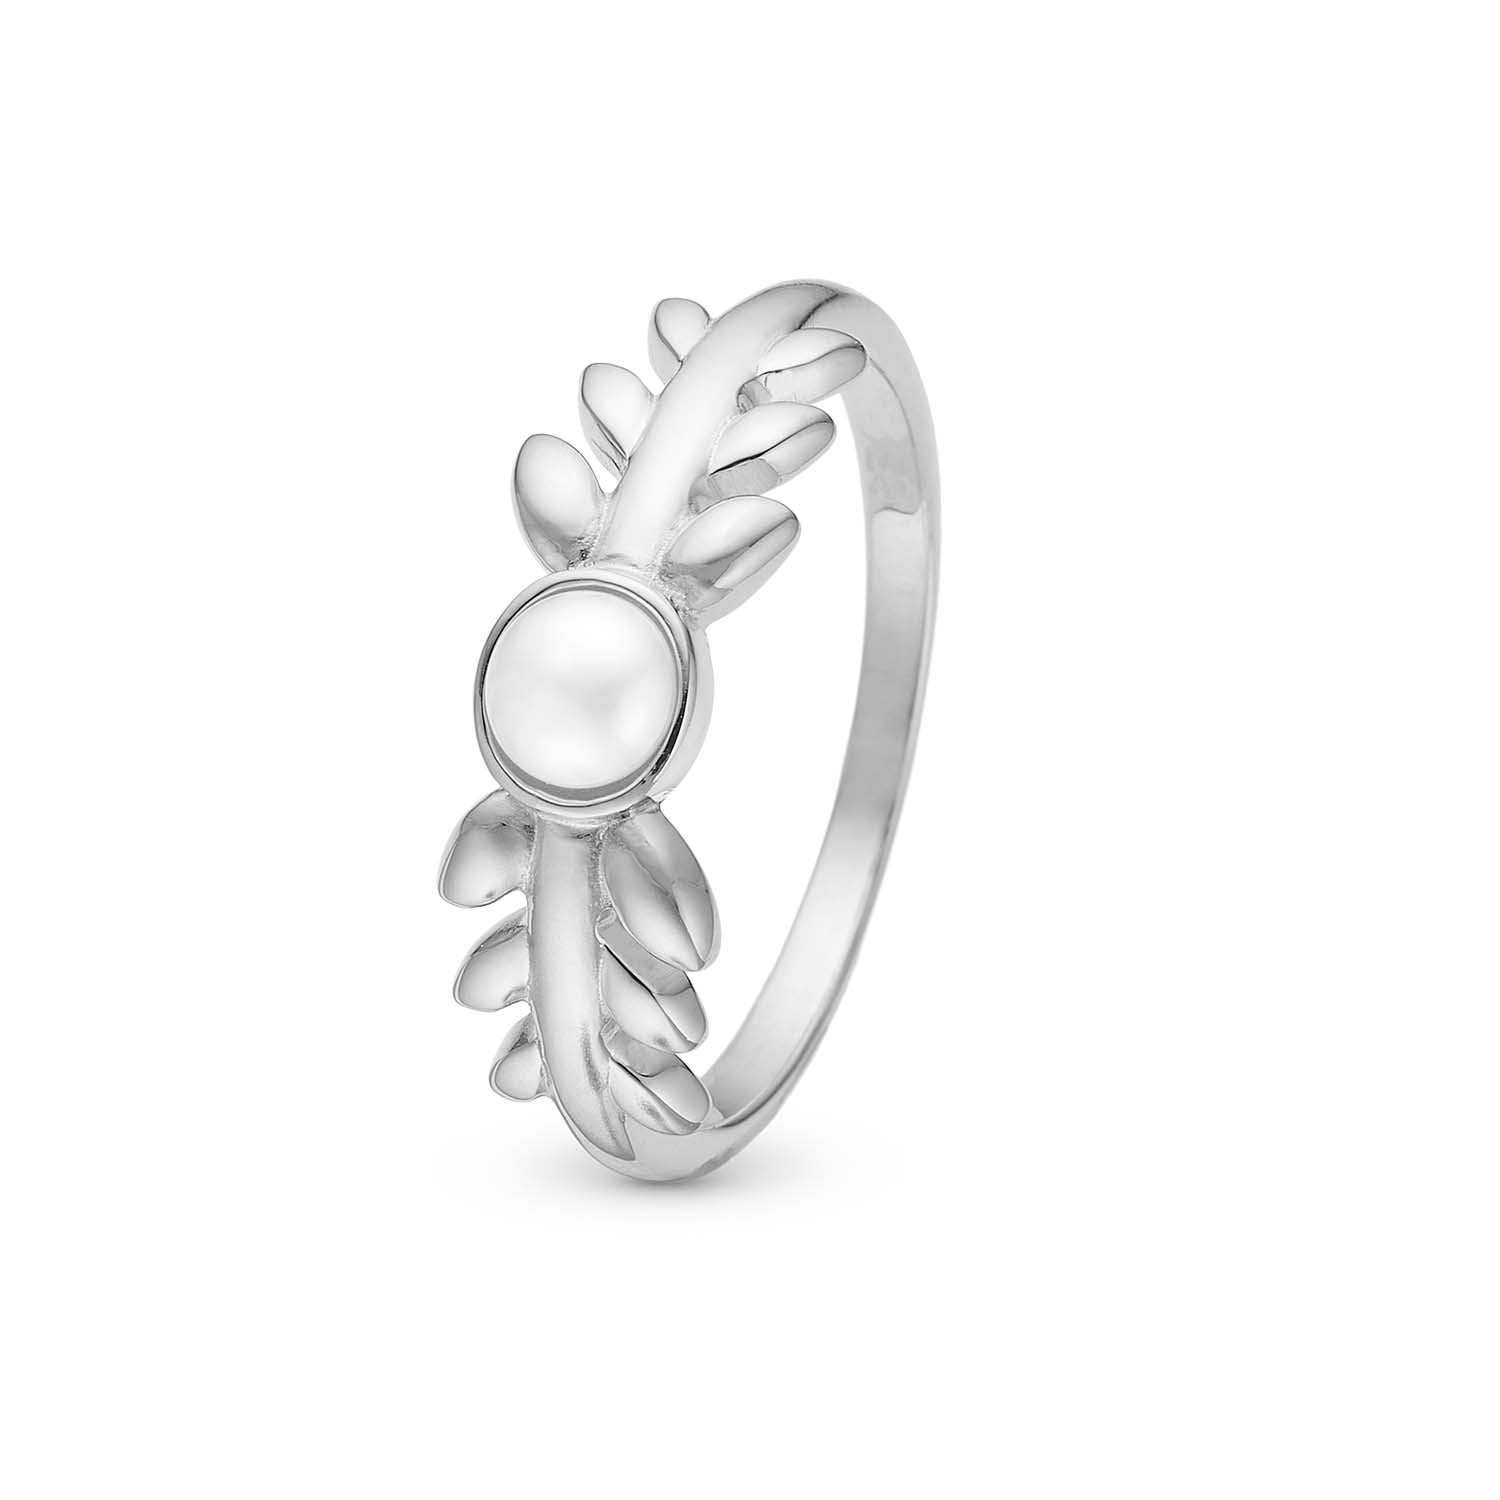 Christina Design London Jewelry & Watches - Pearl Nature ring Sterlingsølv